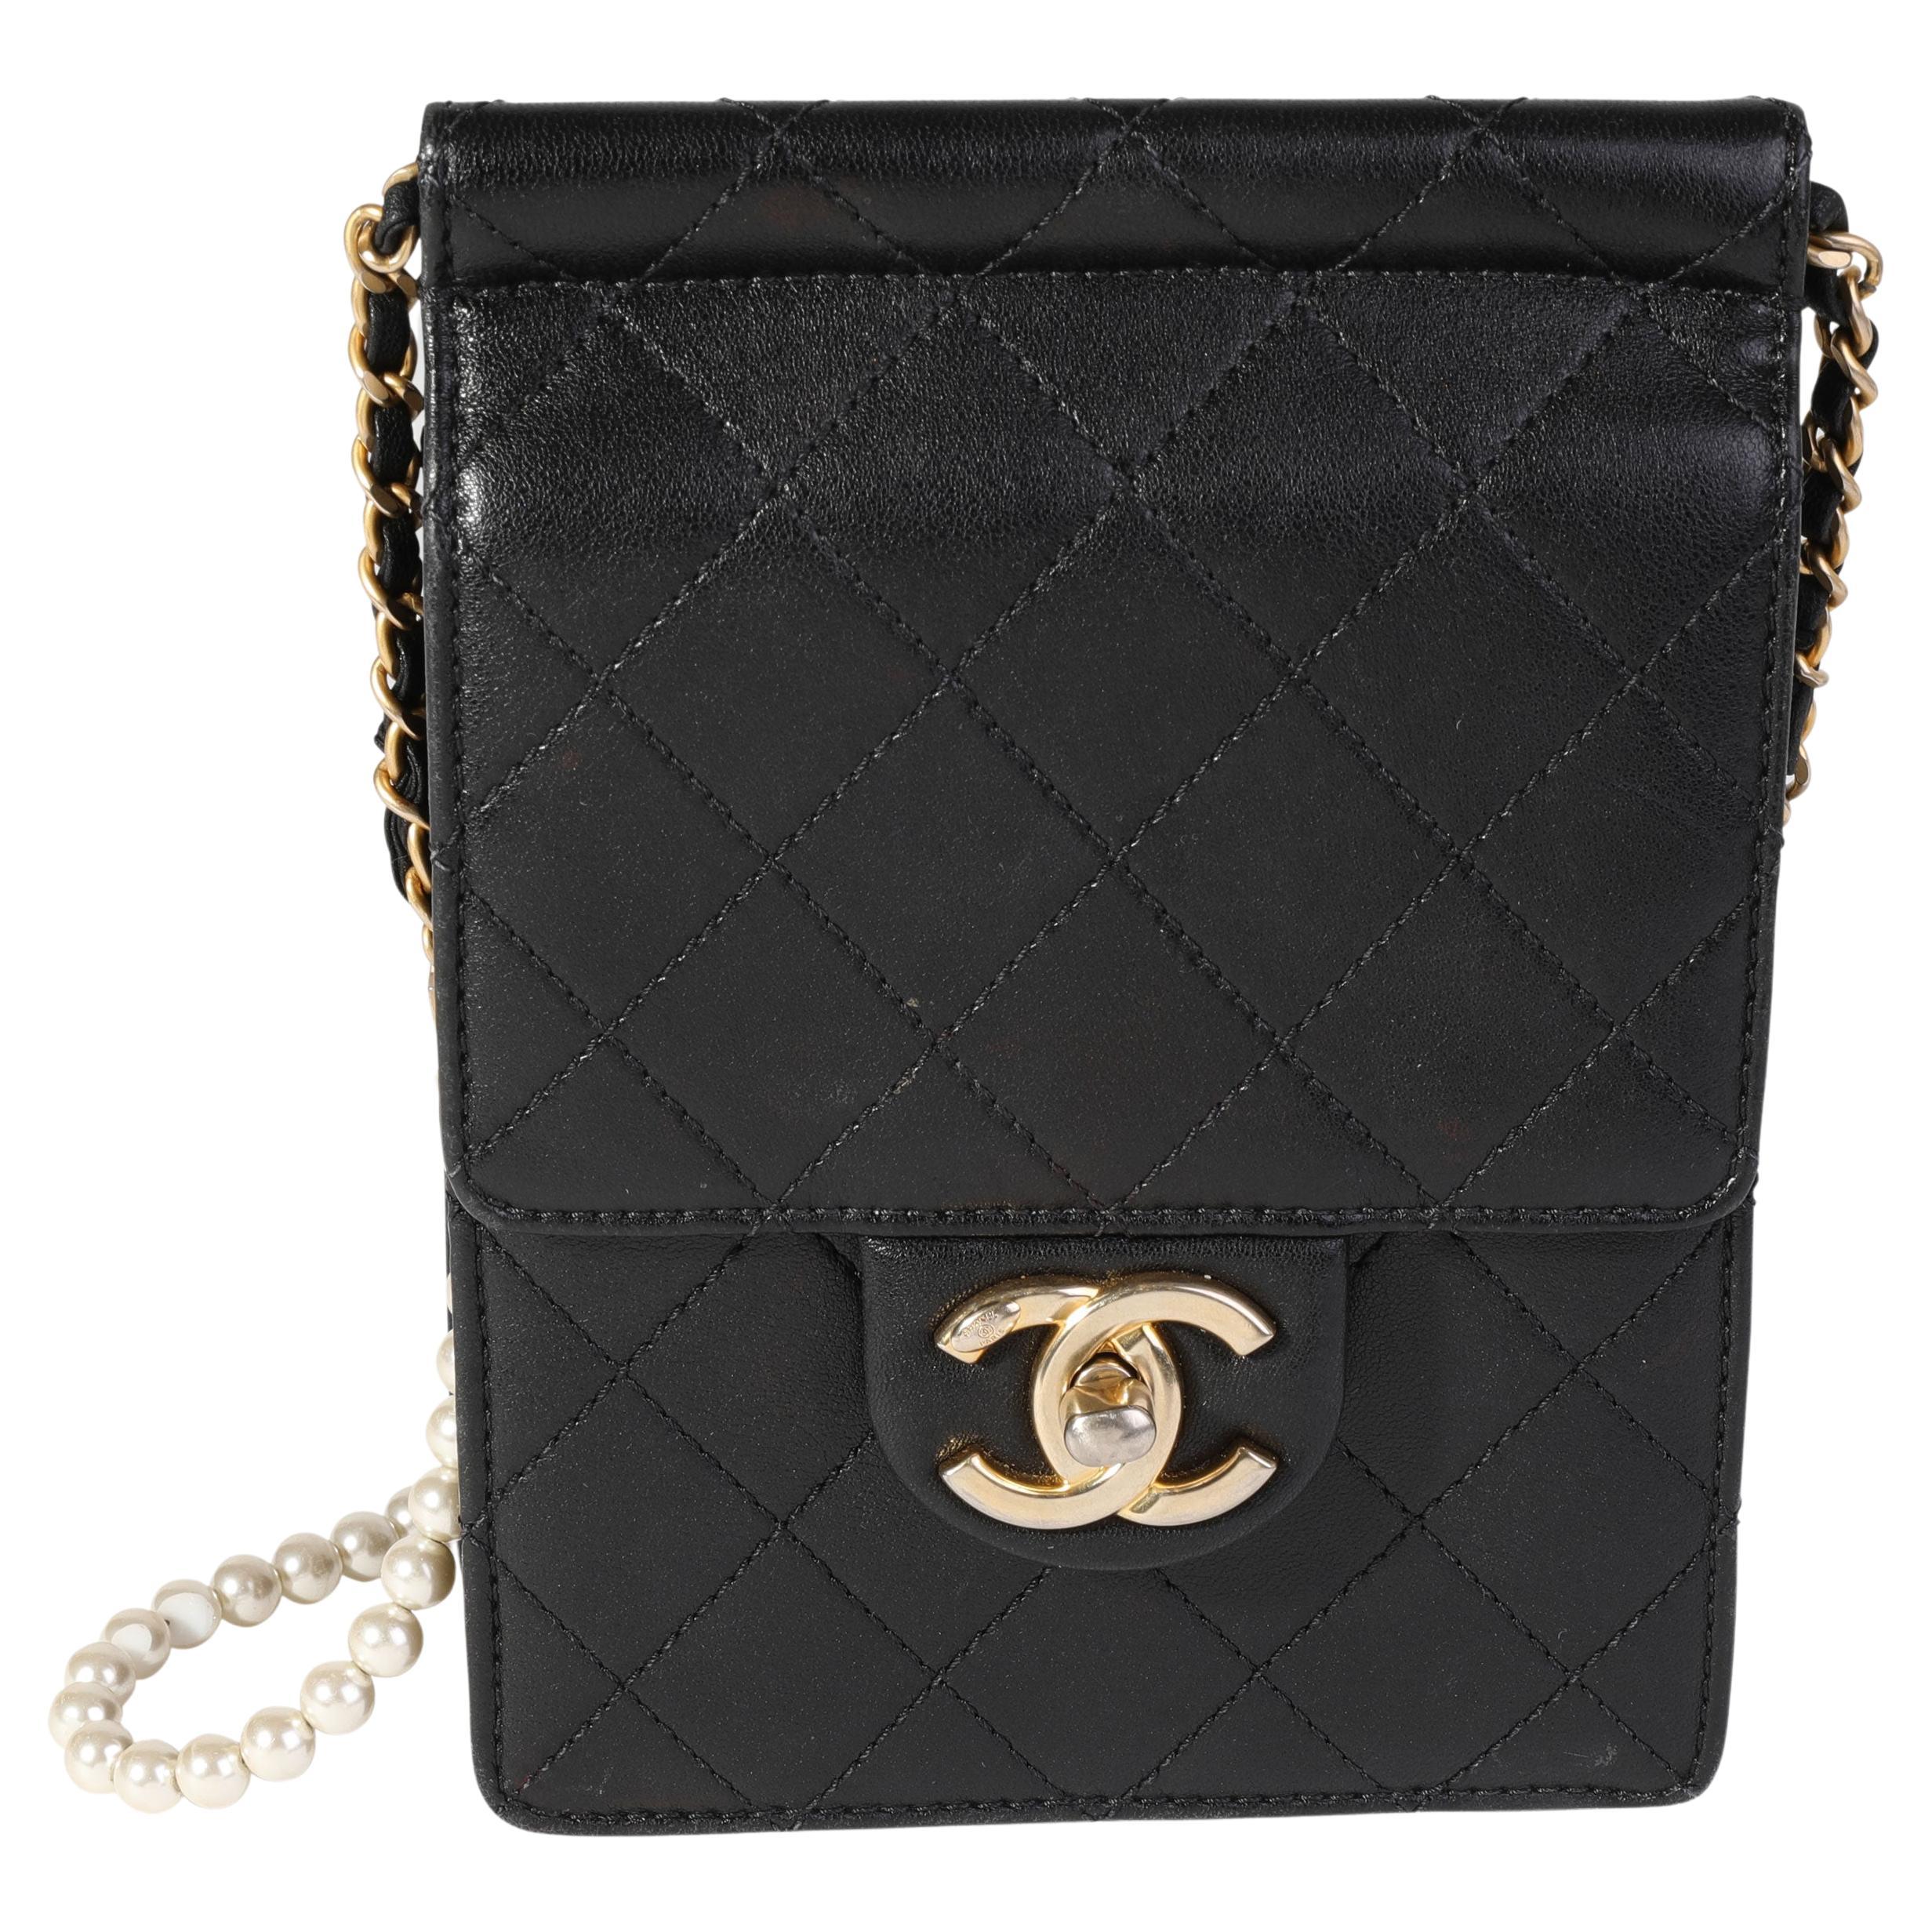 Chanel Black Quilted Goatskin Chic Pearls Crossbody